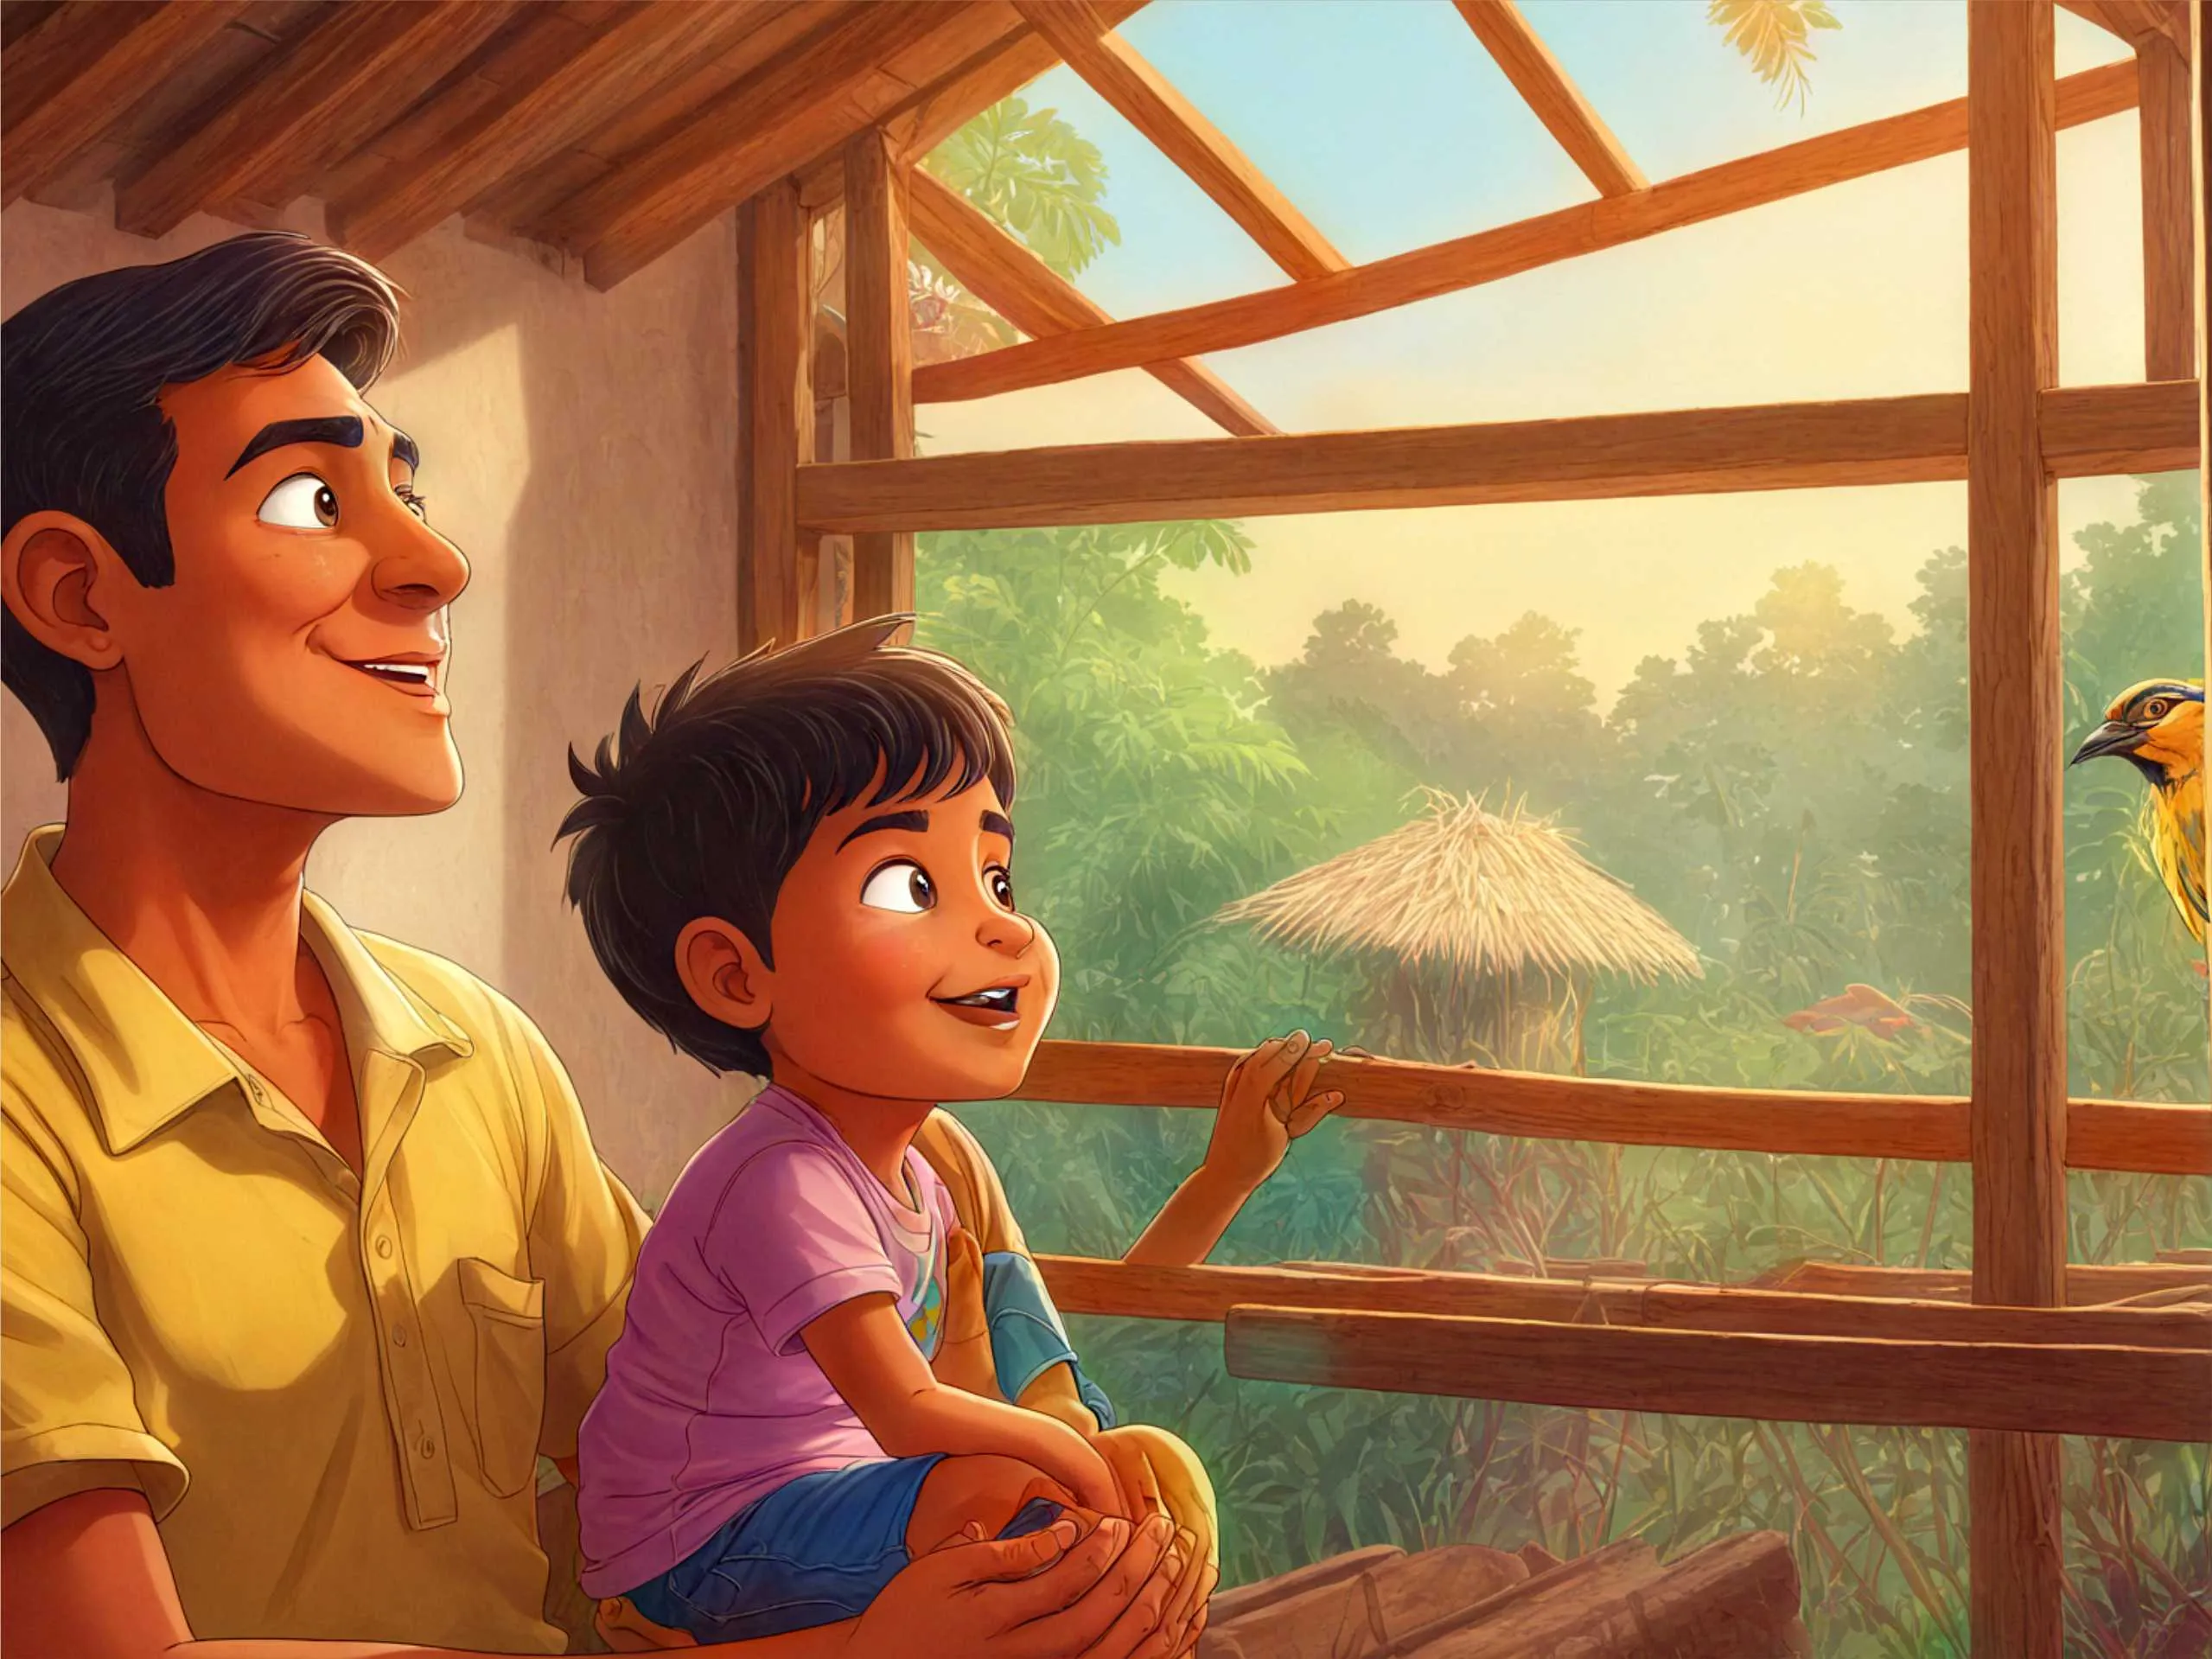  cartoon image of a kid with his father